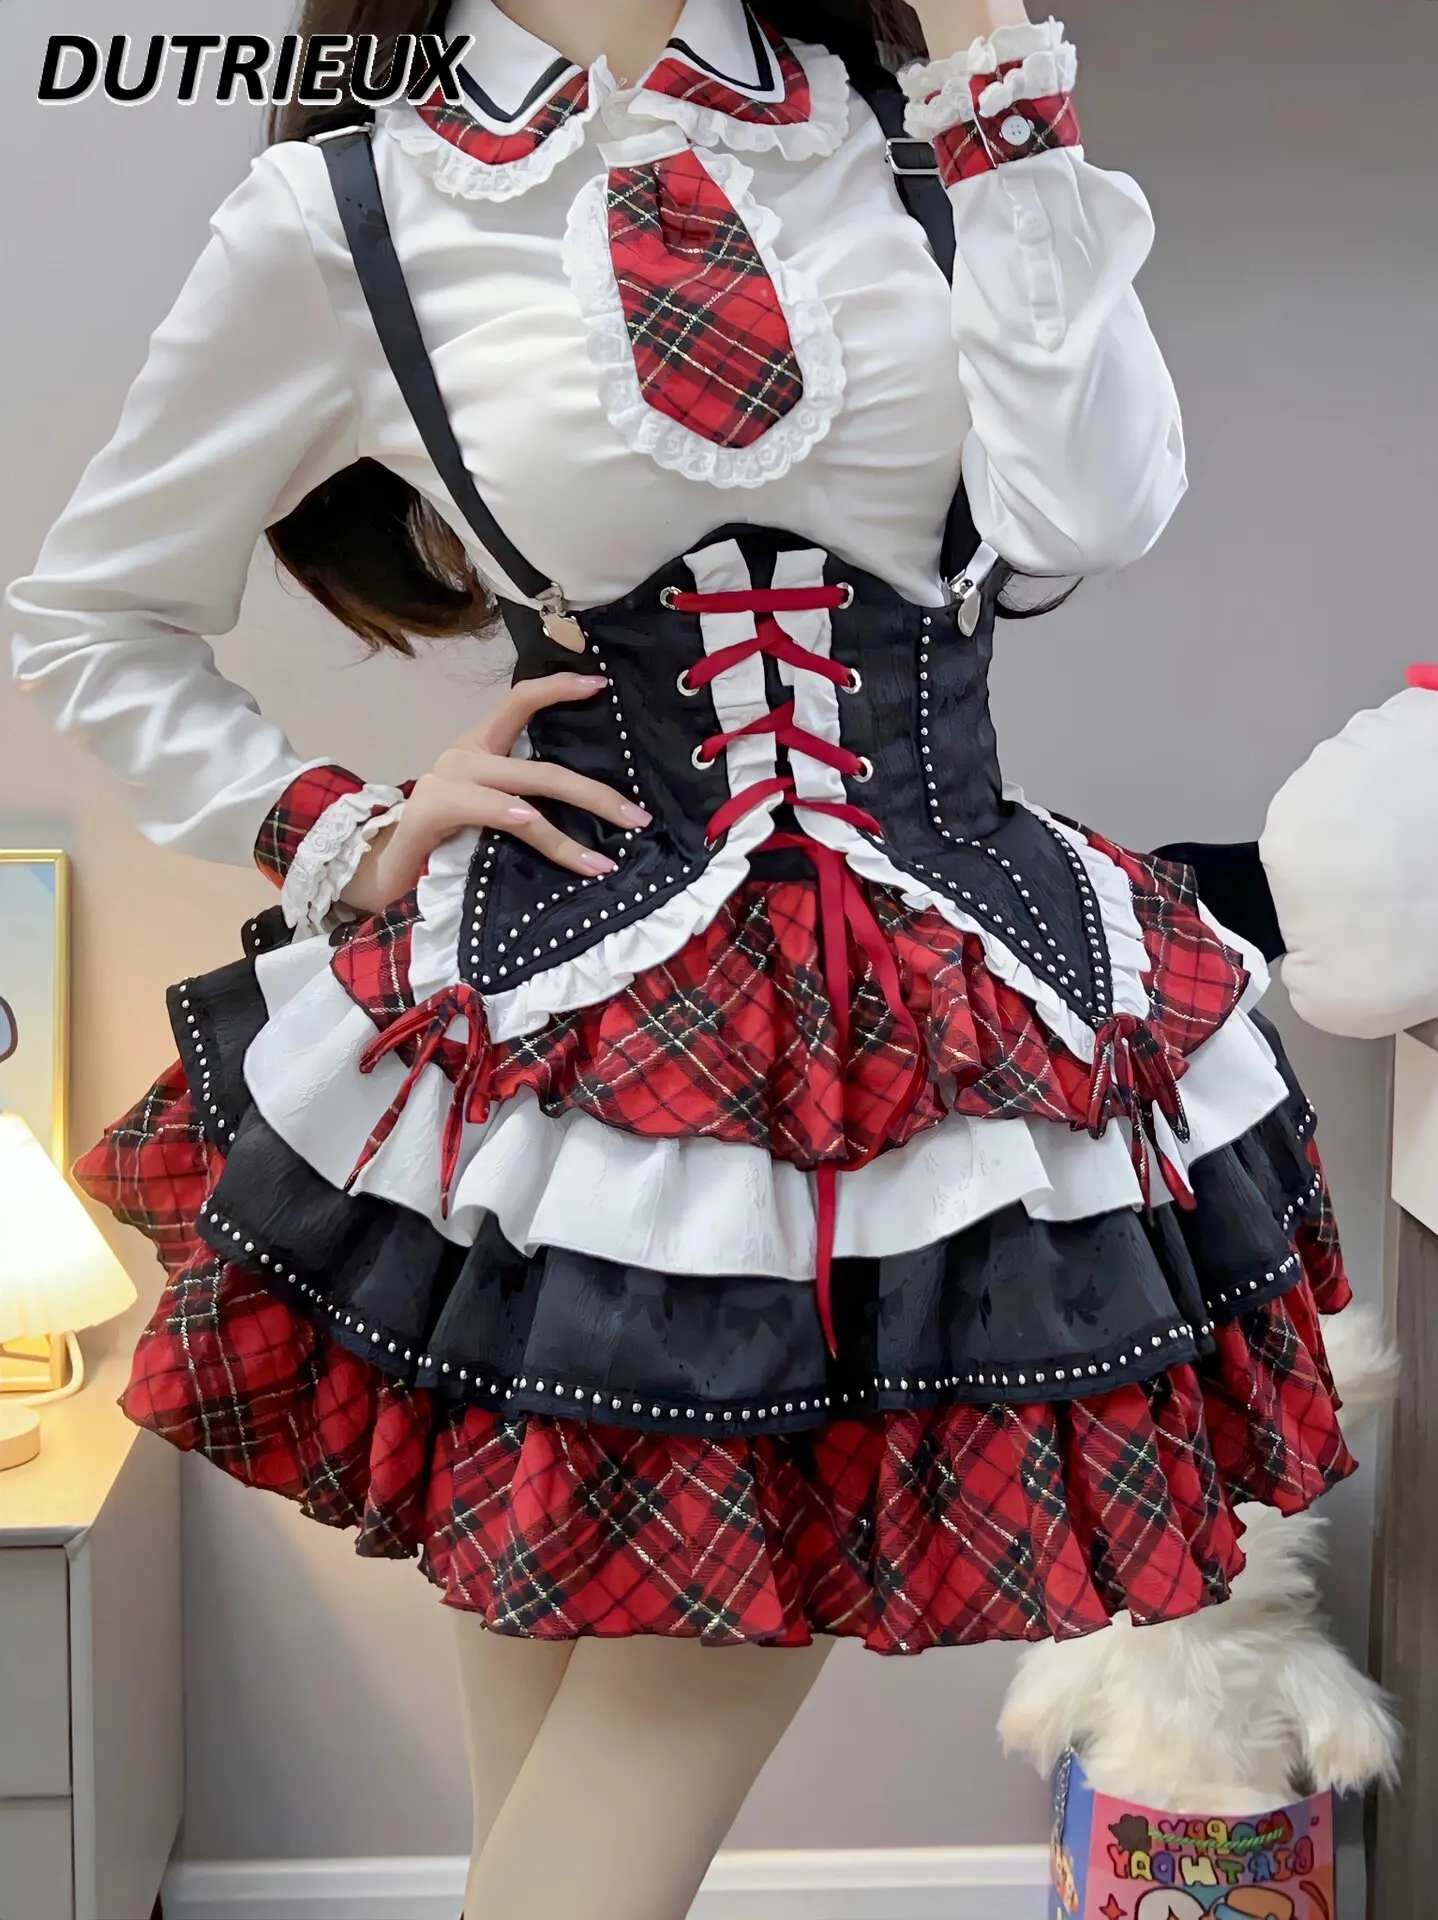 

American-Style Hot Girl Lolita Contrasting Color Black and Red Suspender Waist-Tied + White Shirt + Pettiskirt Princess Set